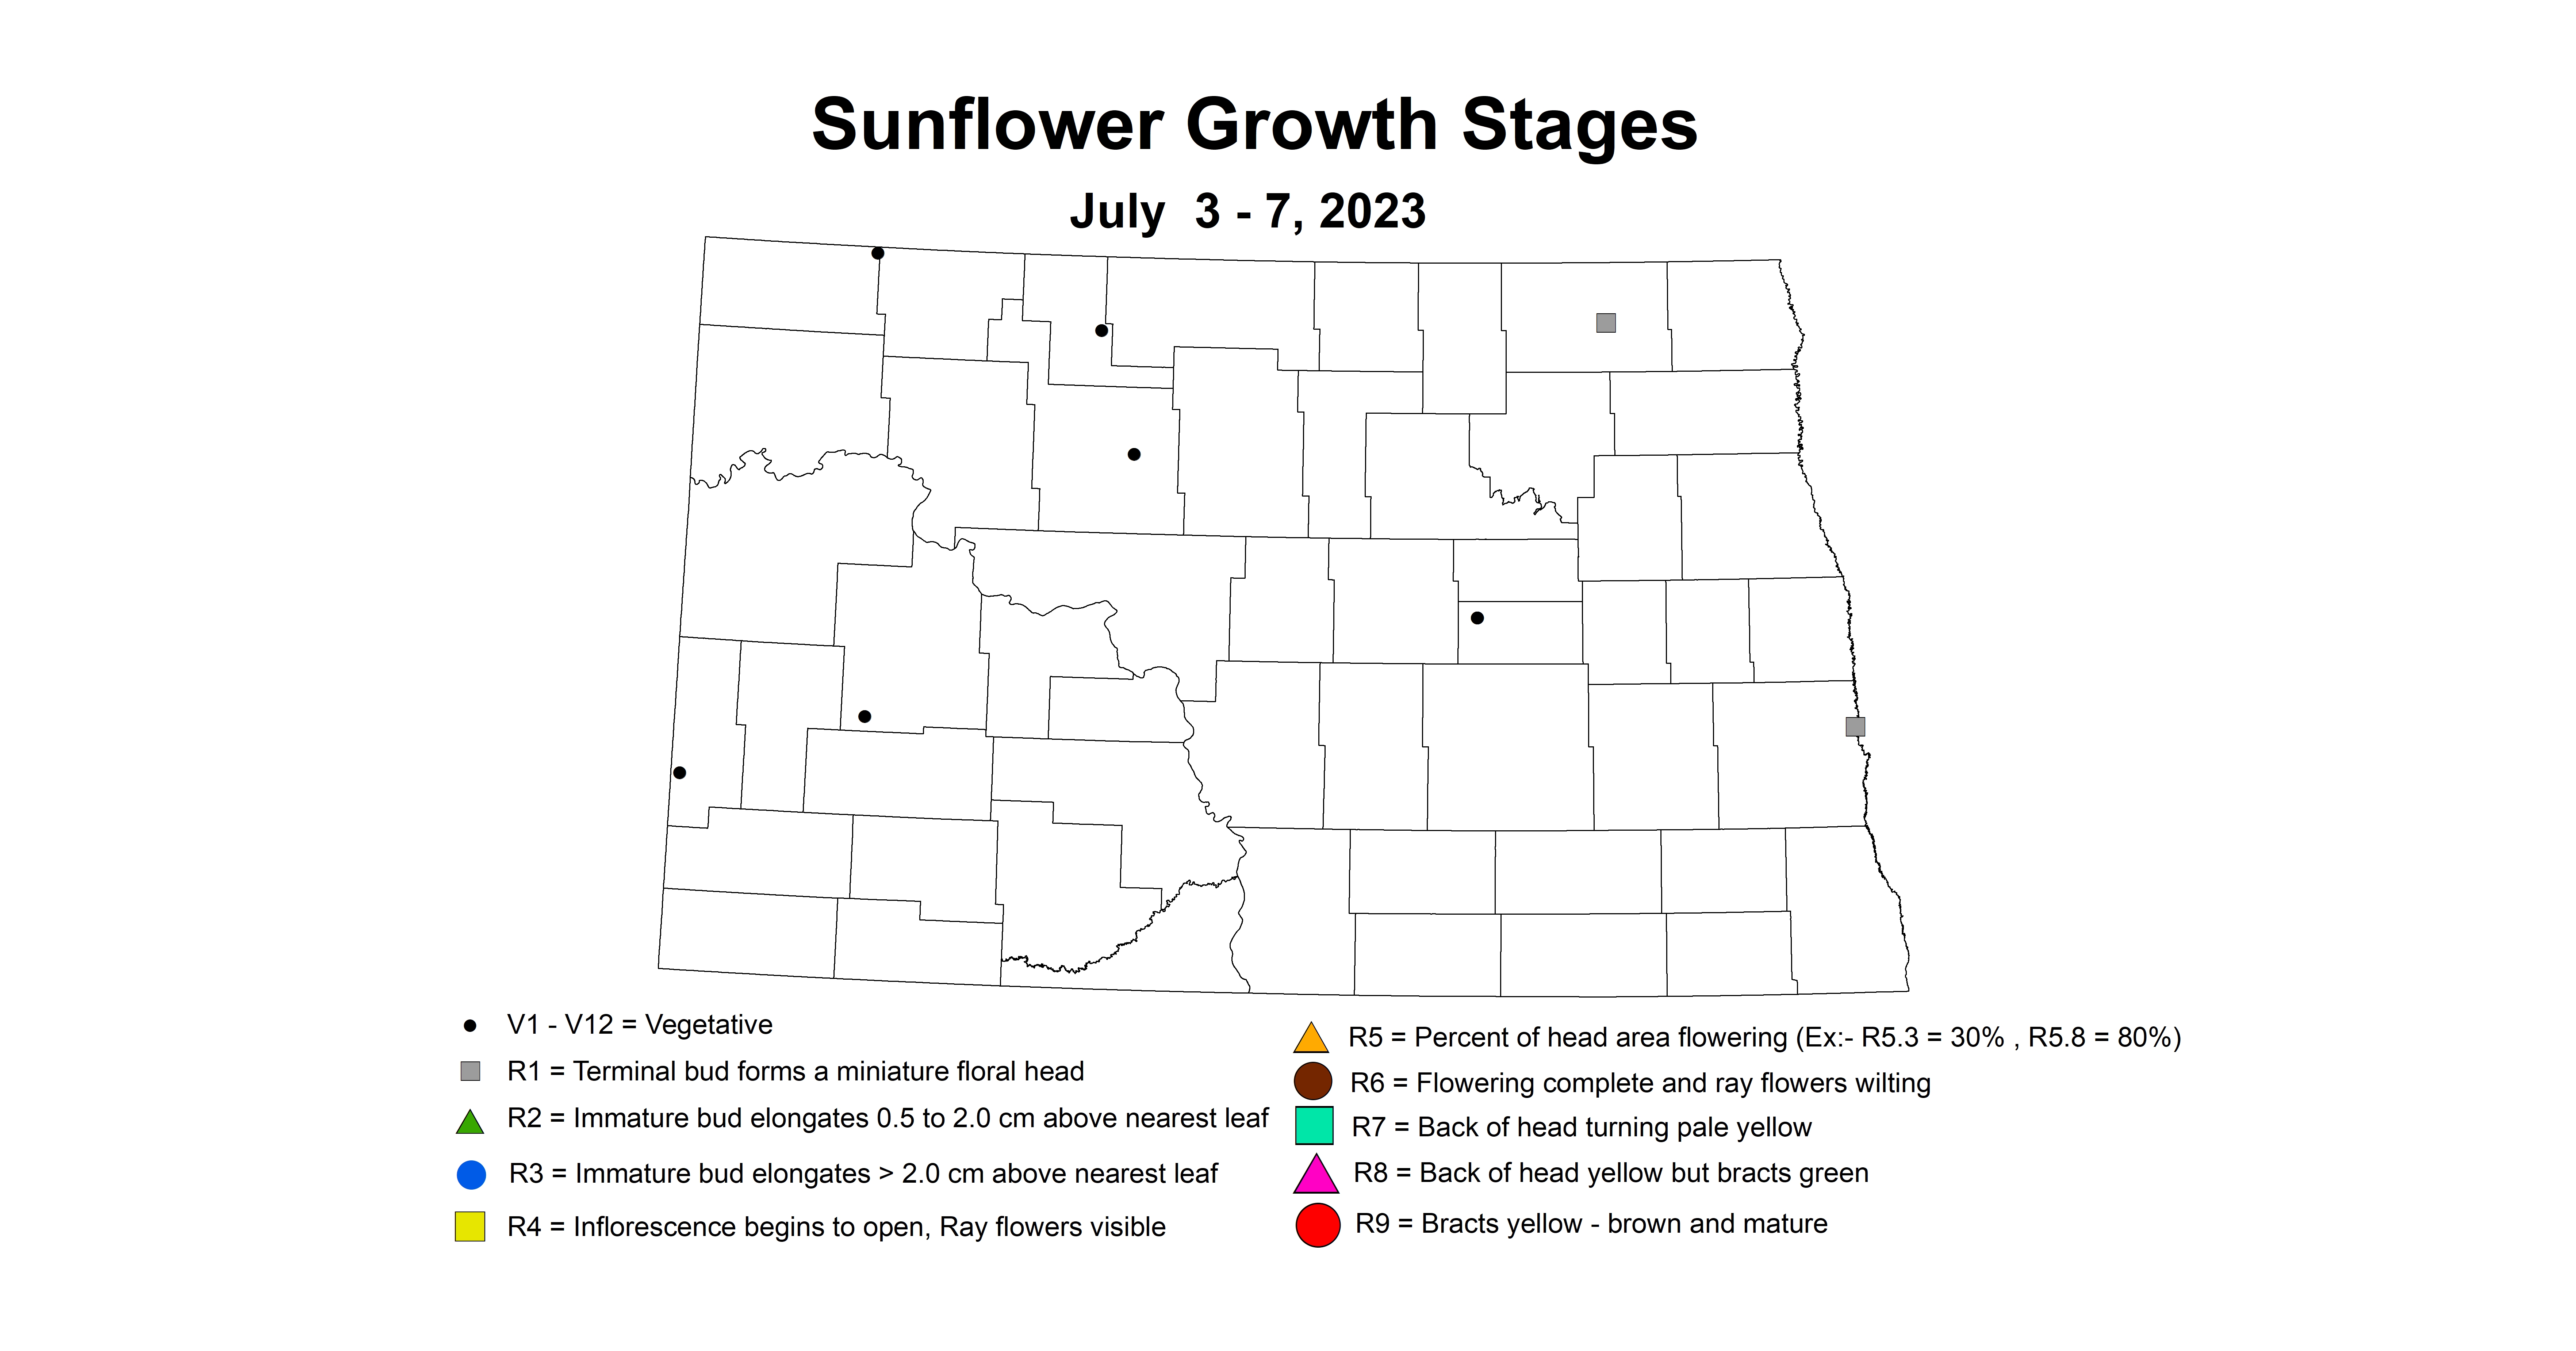 sunflower insecttrap growth stages July 3-7 2023